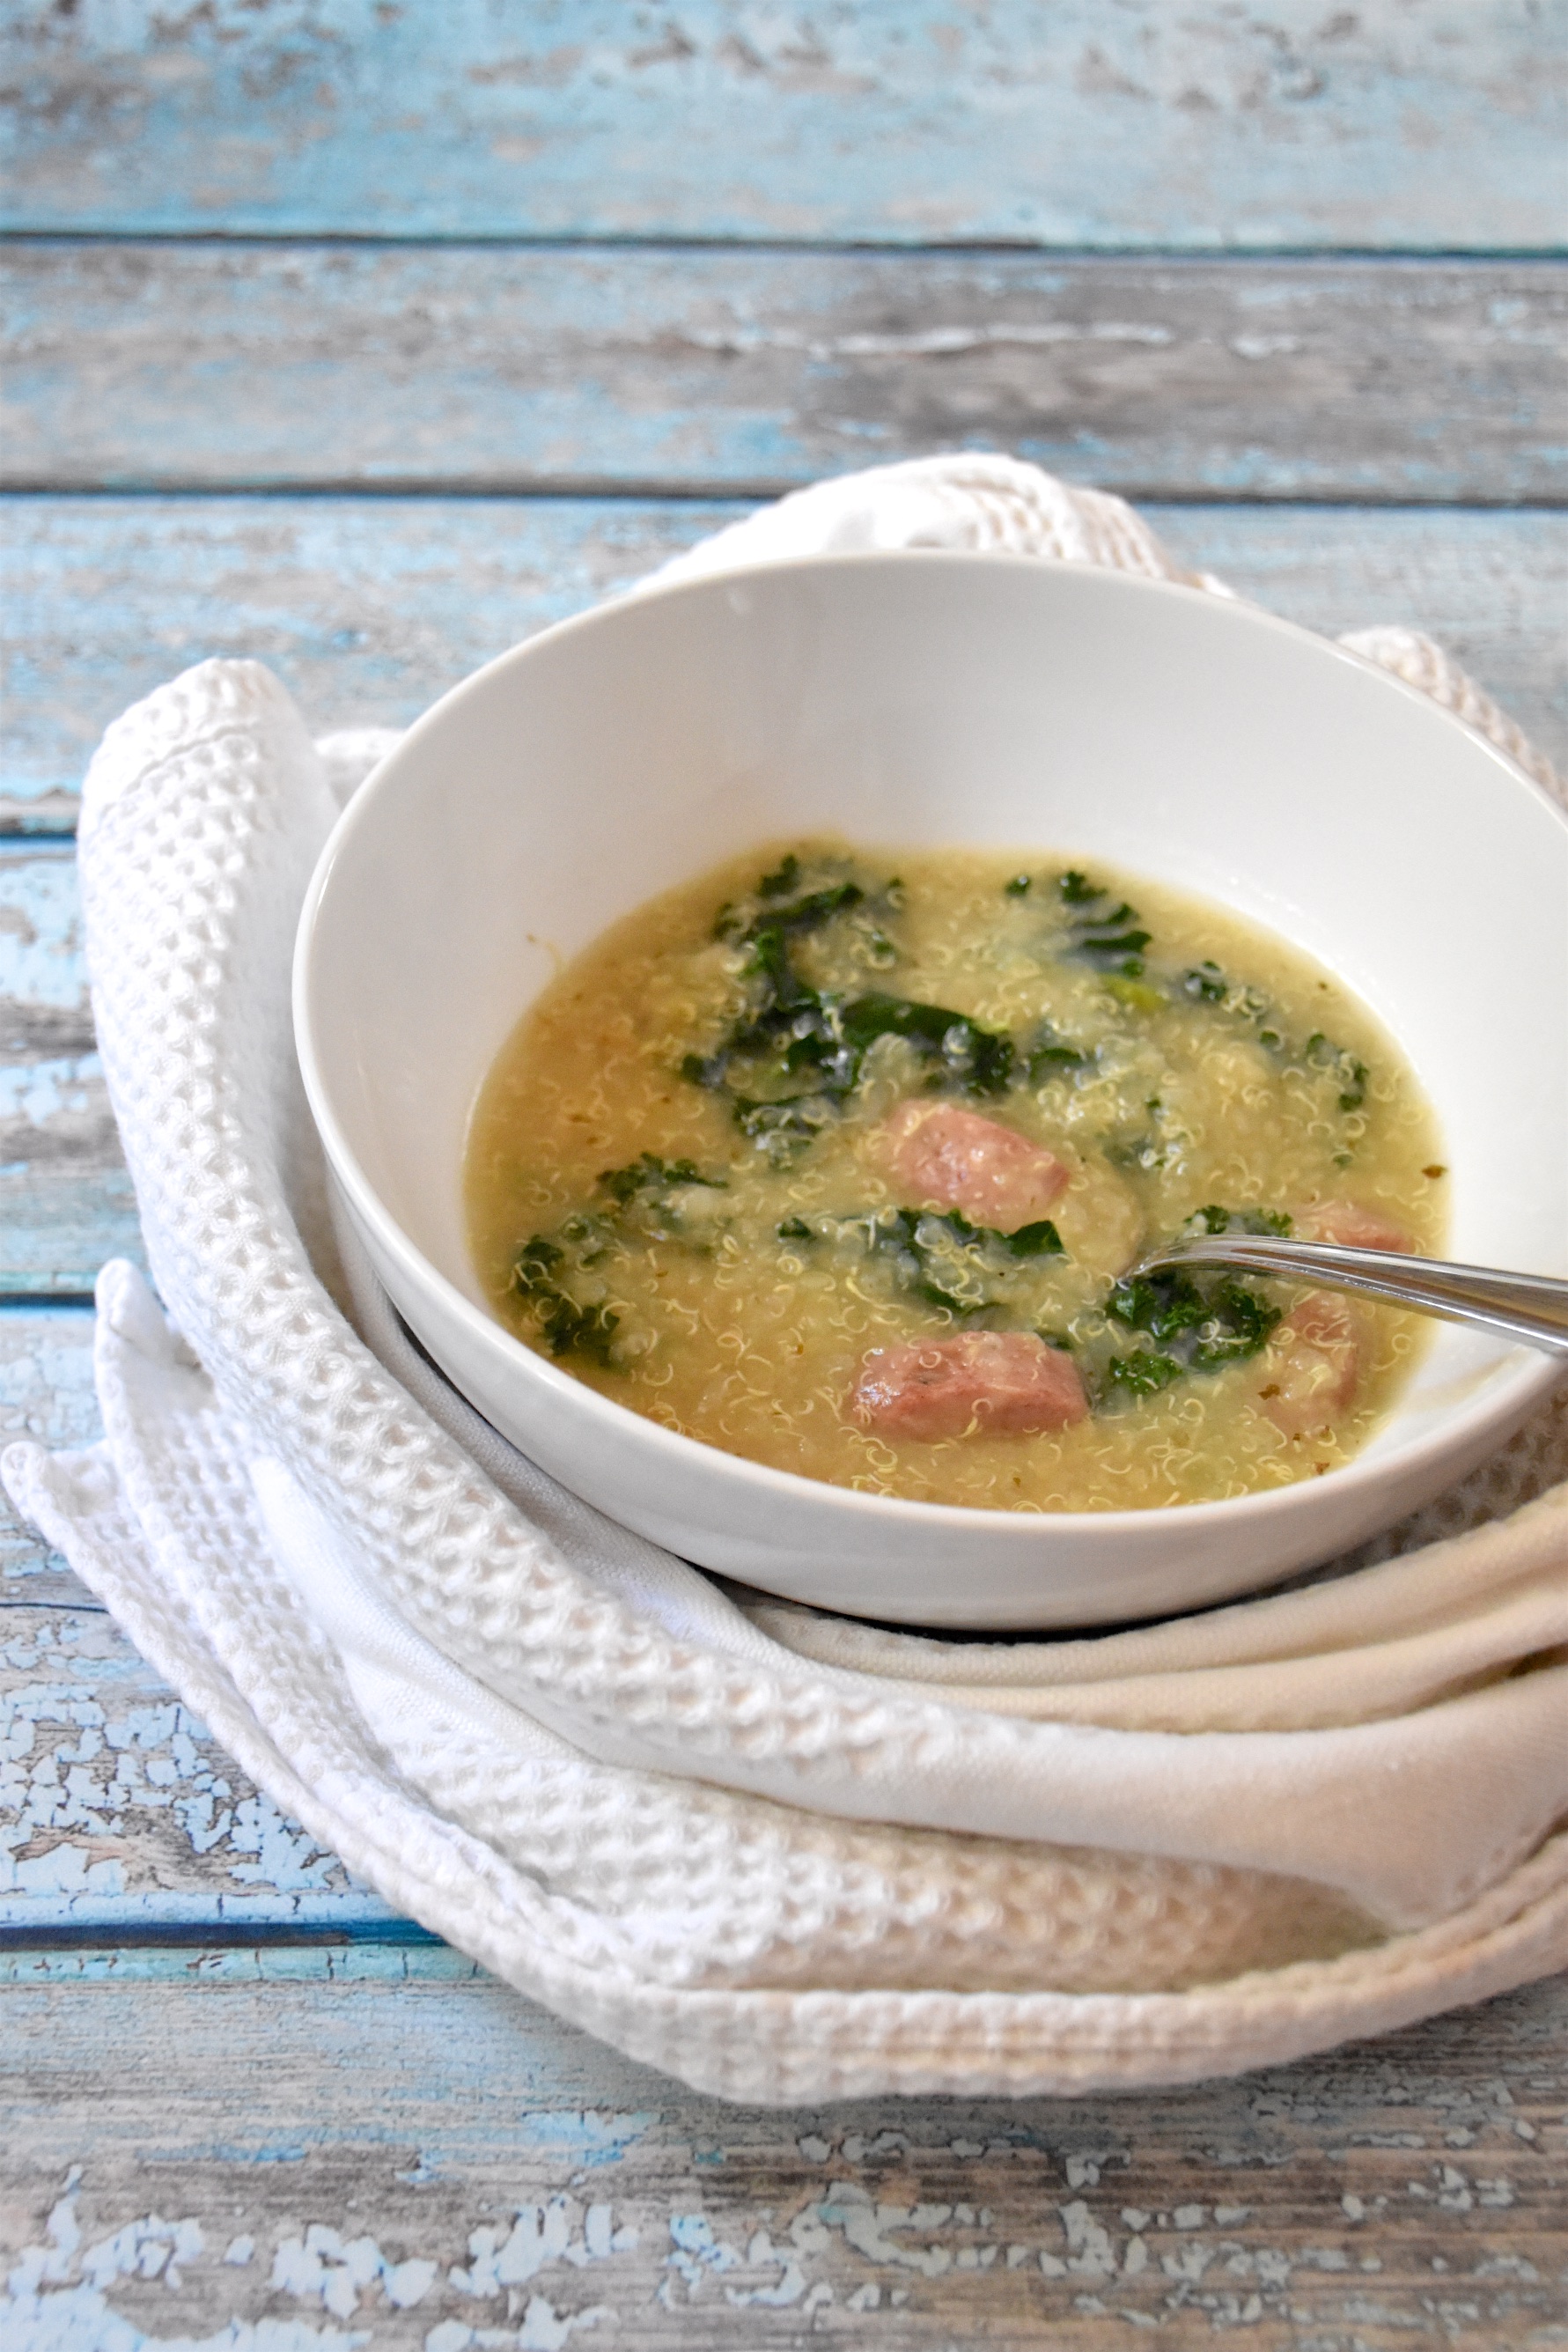 If you love your instant pot and eating healthy, you'll love this gluten-free dairy-free sausage, kale, and quinoa soup recipe! Click through for the full post on RachaelRoehmholdt.com